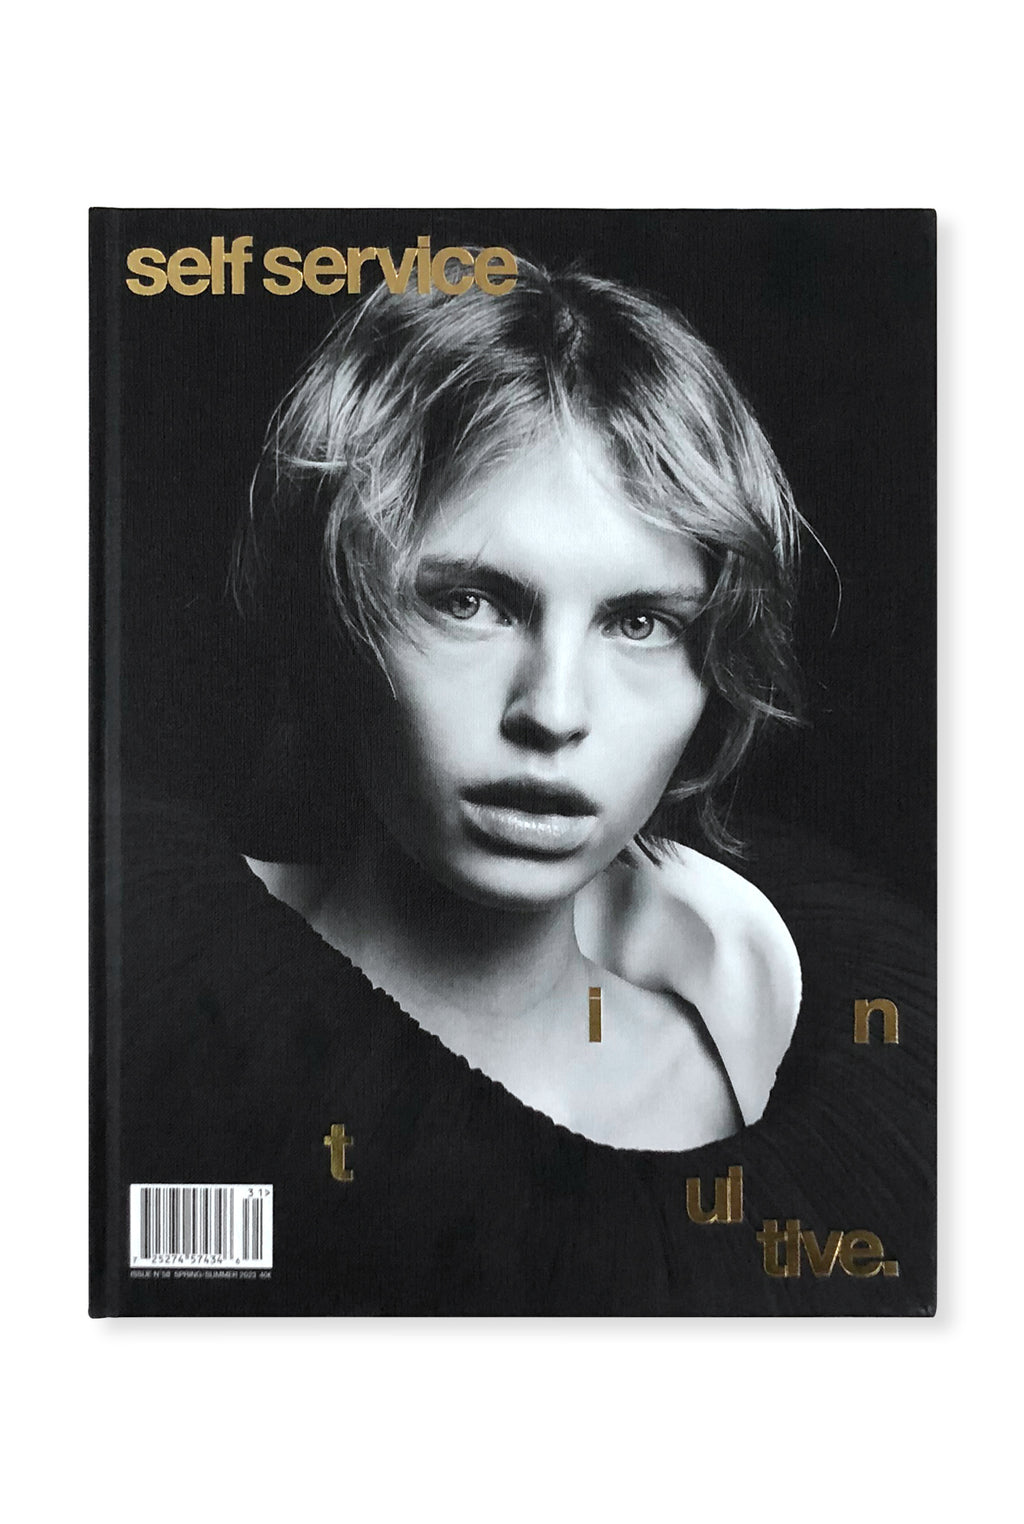 Self Service, Issue 58